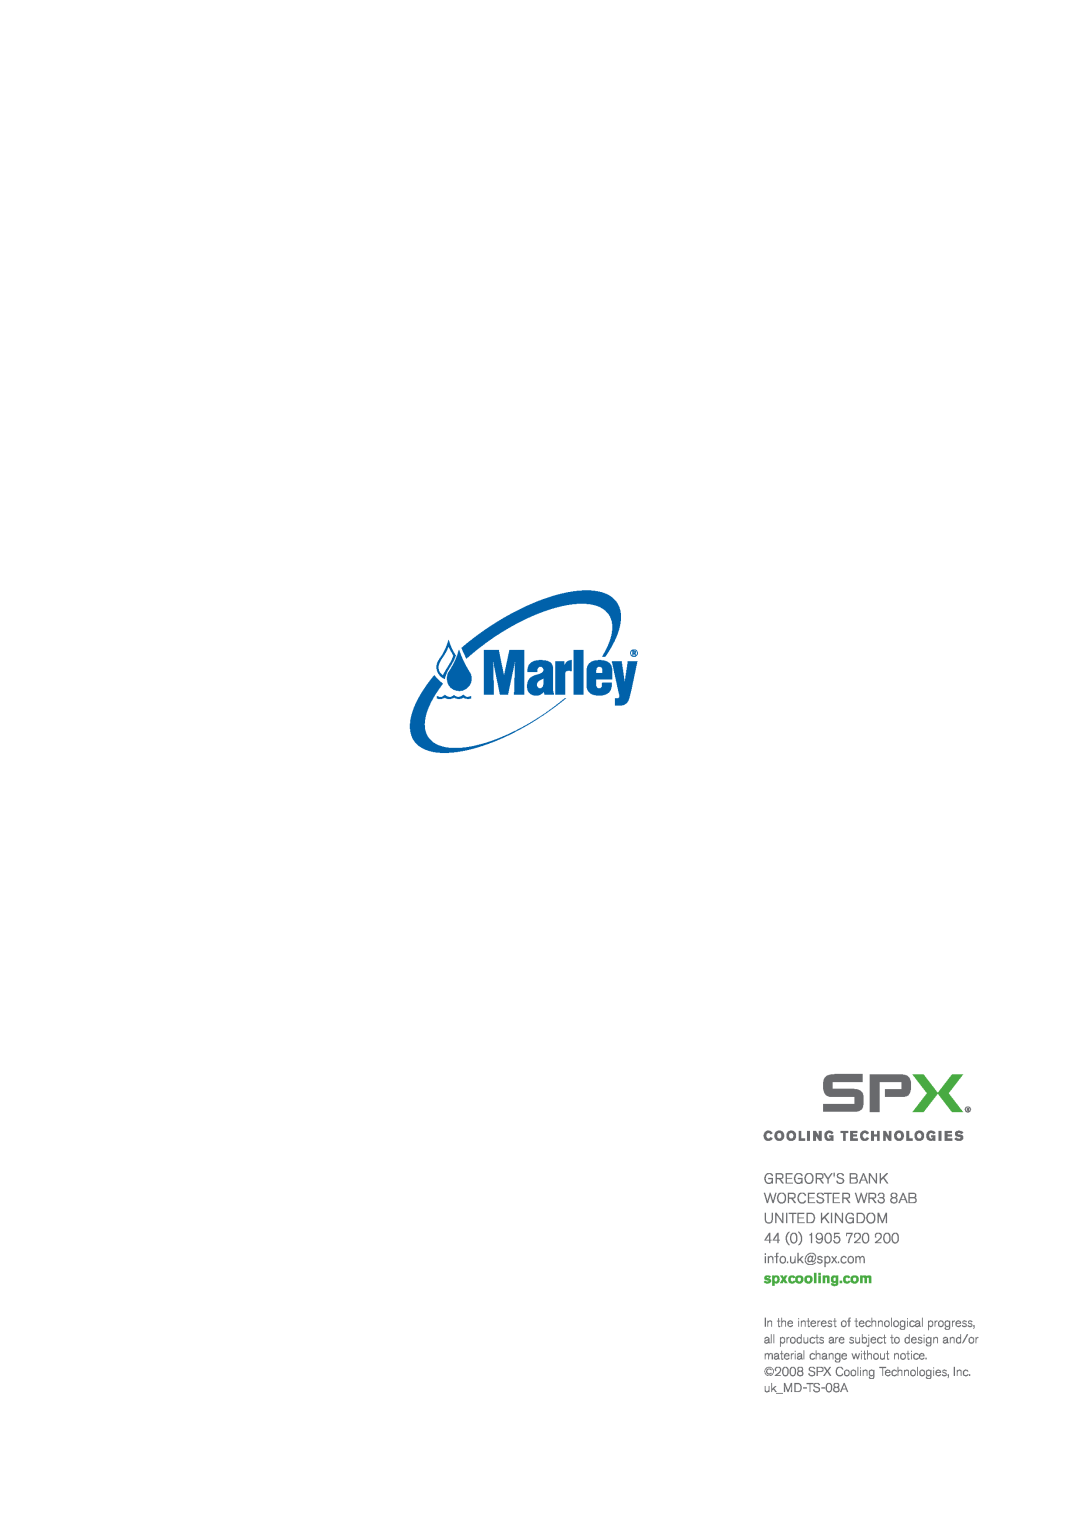 SPX Cooling Technologies Marley MD specifications GREGORYS BANK WORCESTER WR3 8AB UNITED KINGDOM 